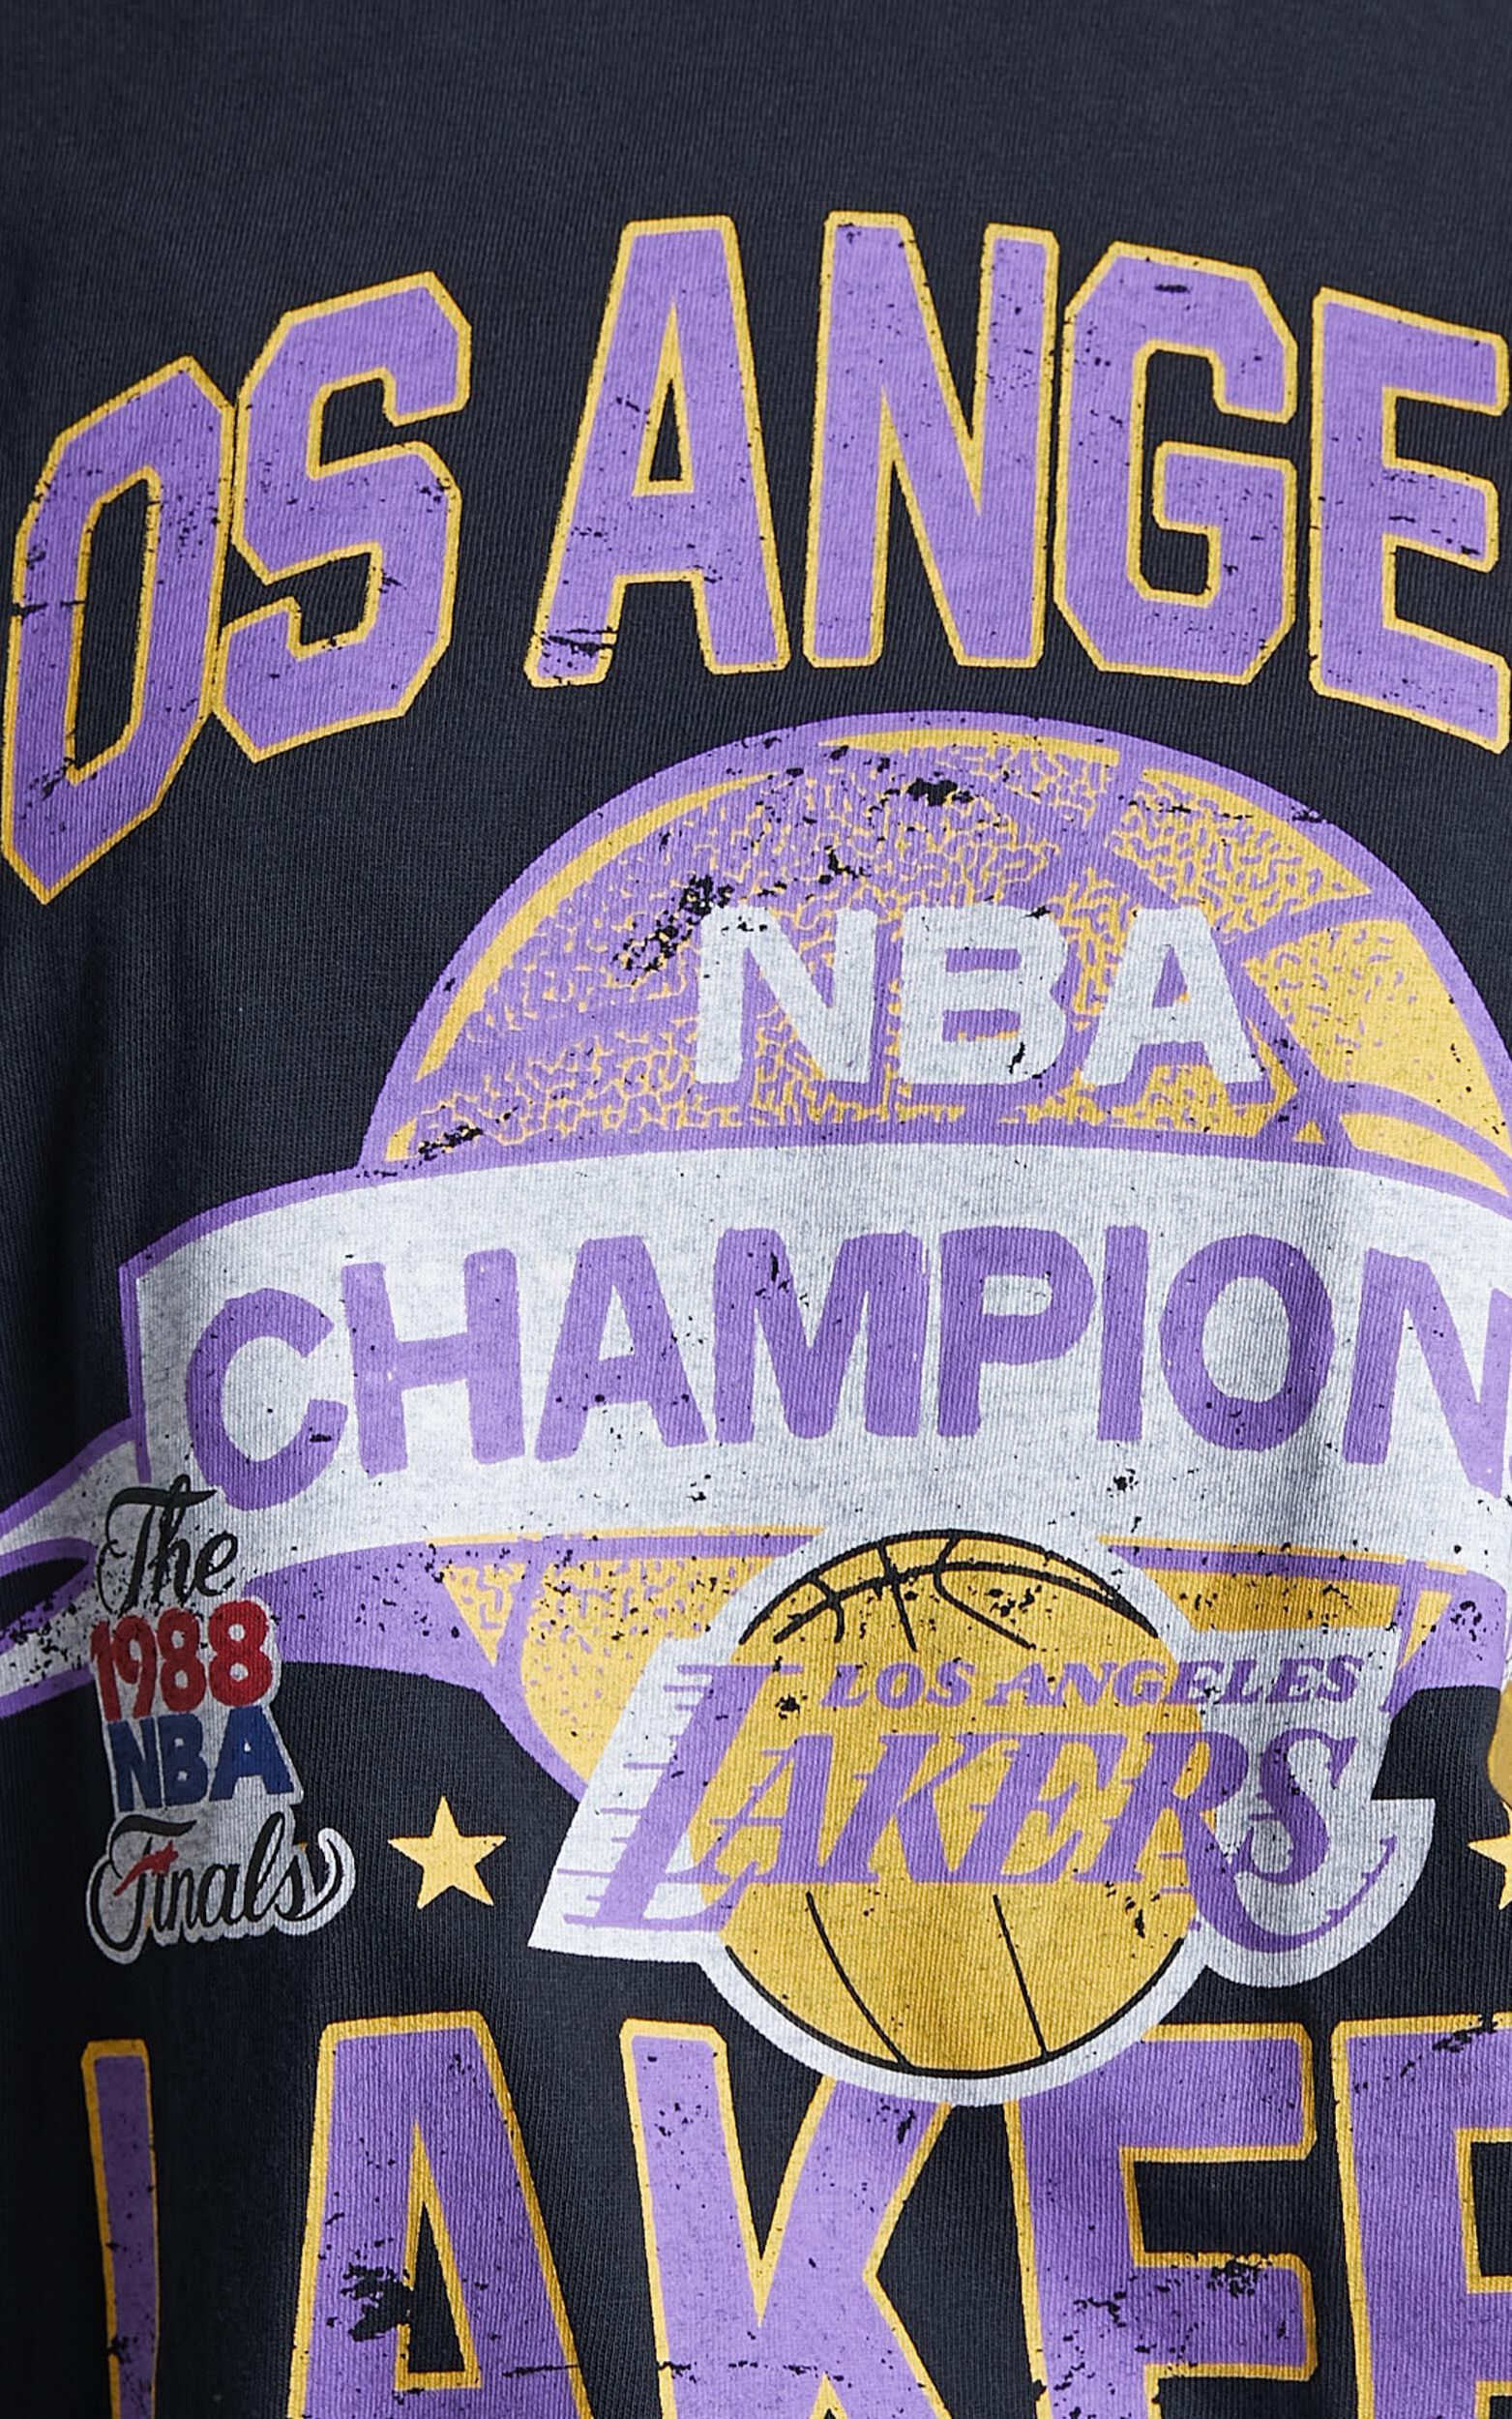 Mitchell & Ness Los Angeles Lakers T-Shirt Faded Black